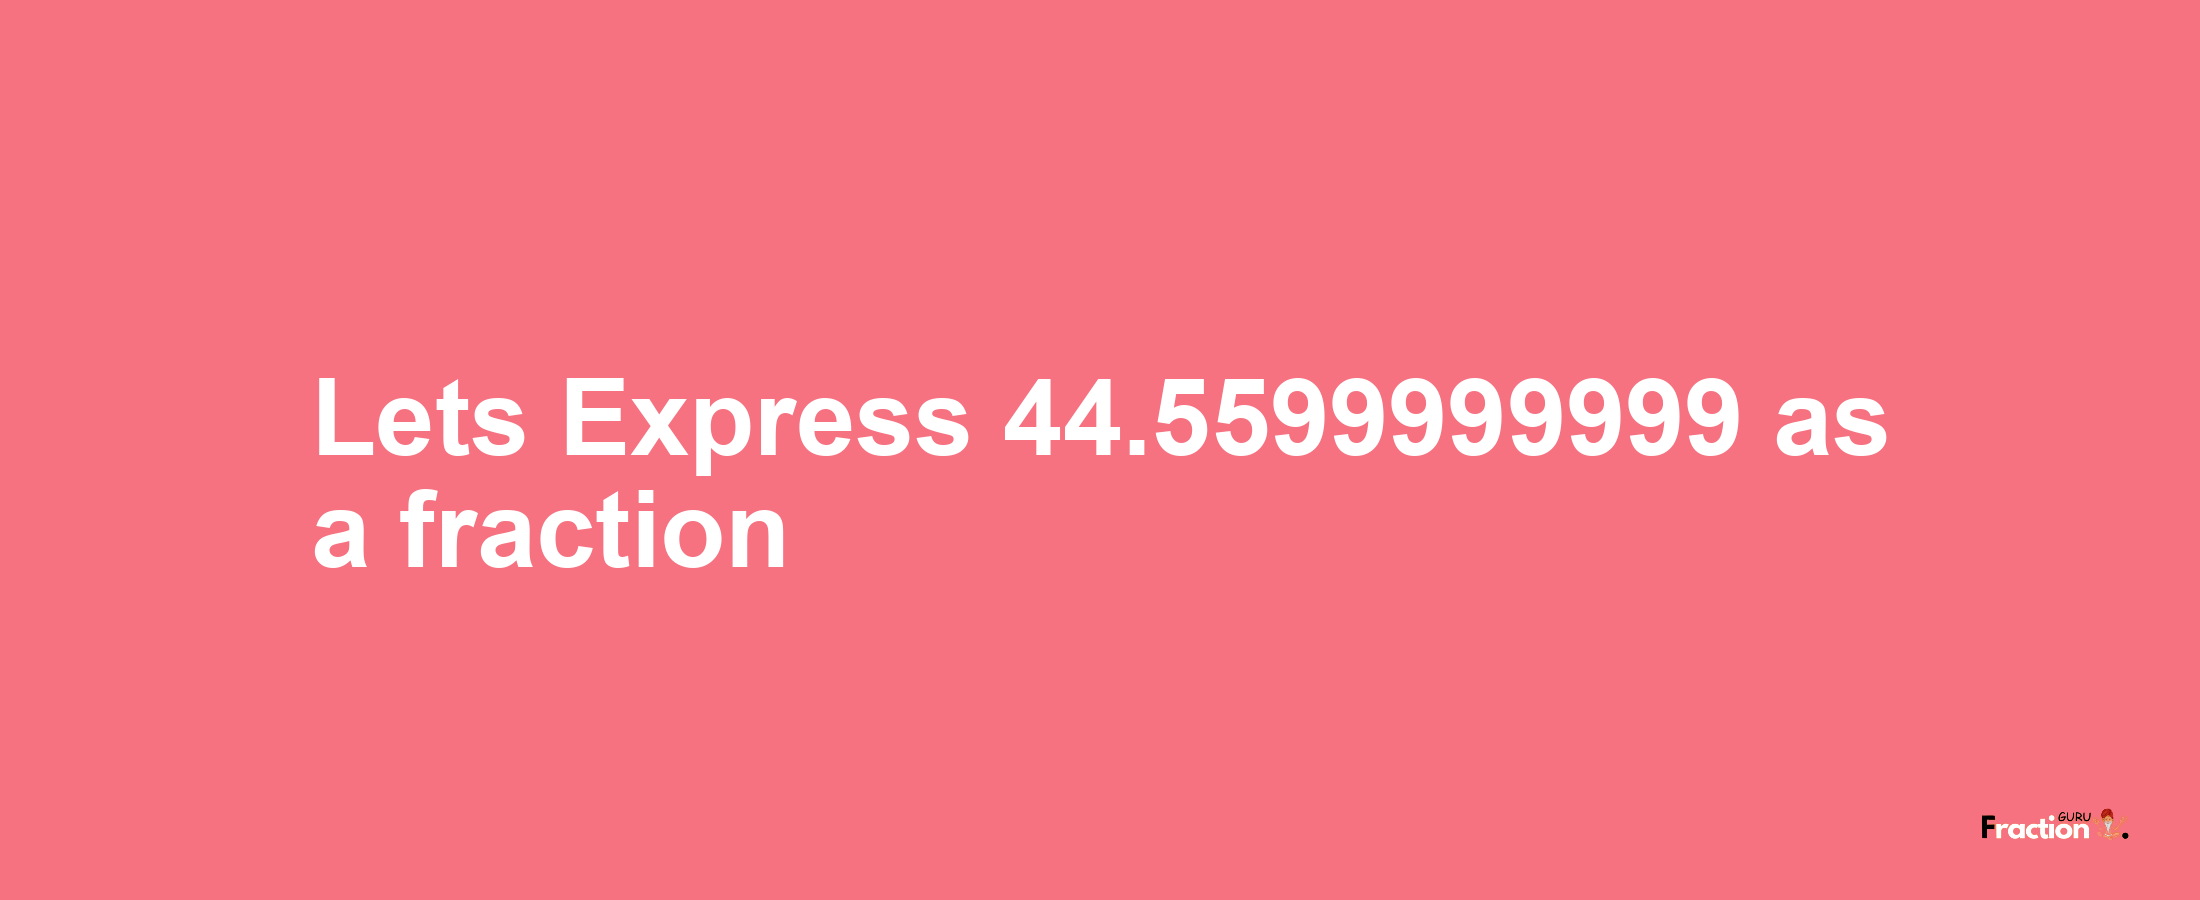 Lets Express 44.5599999999 as afraction